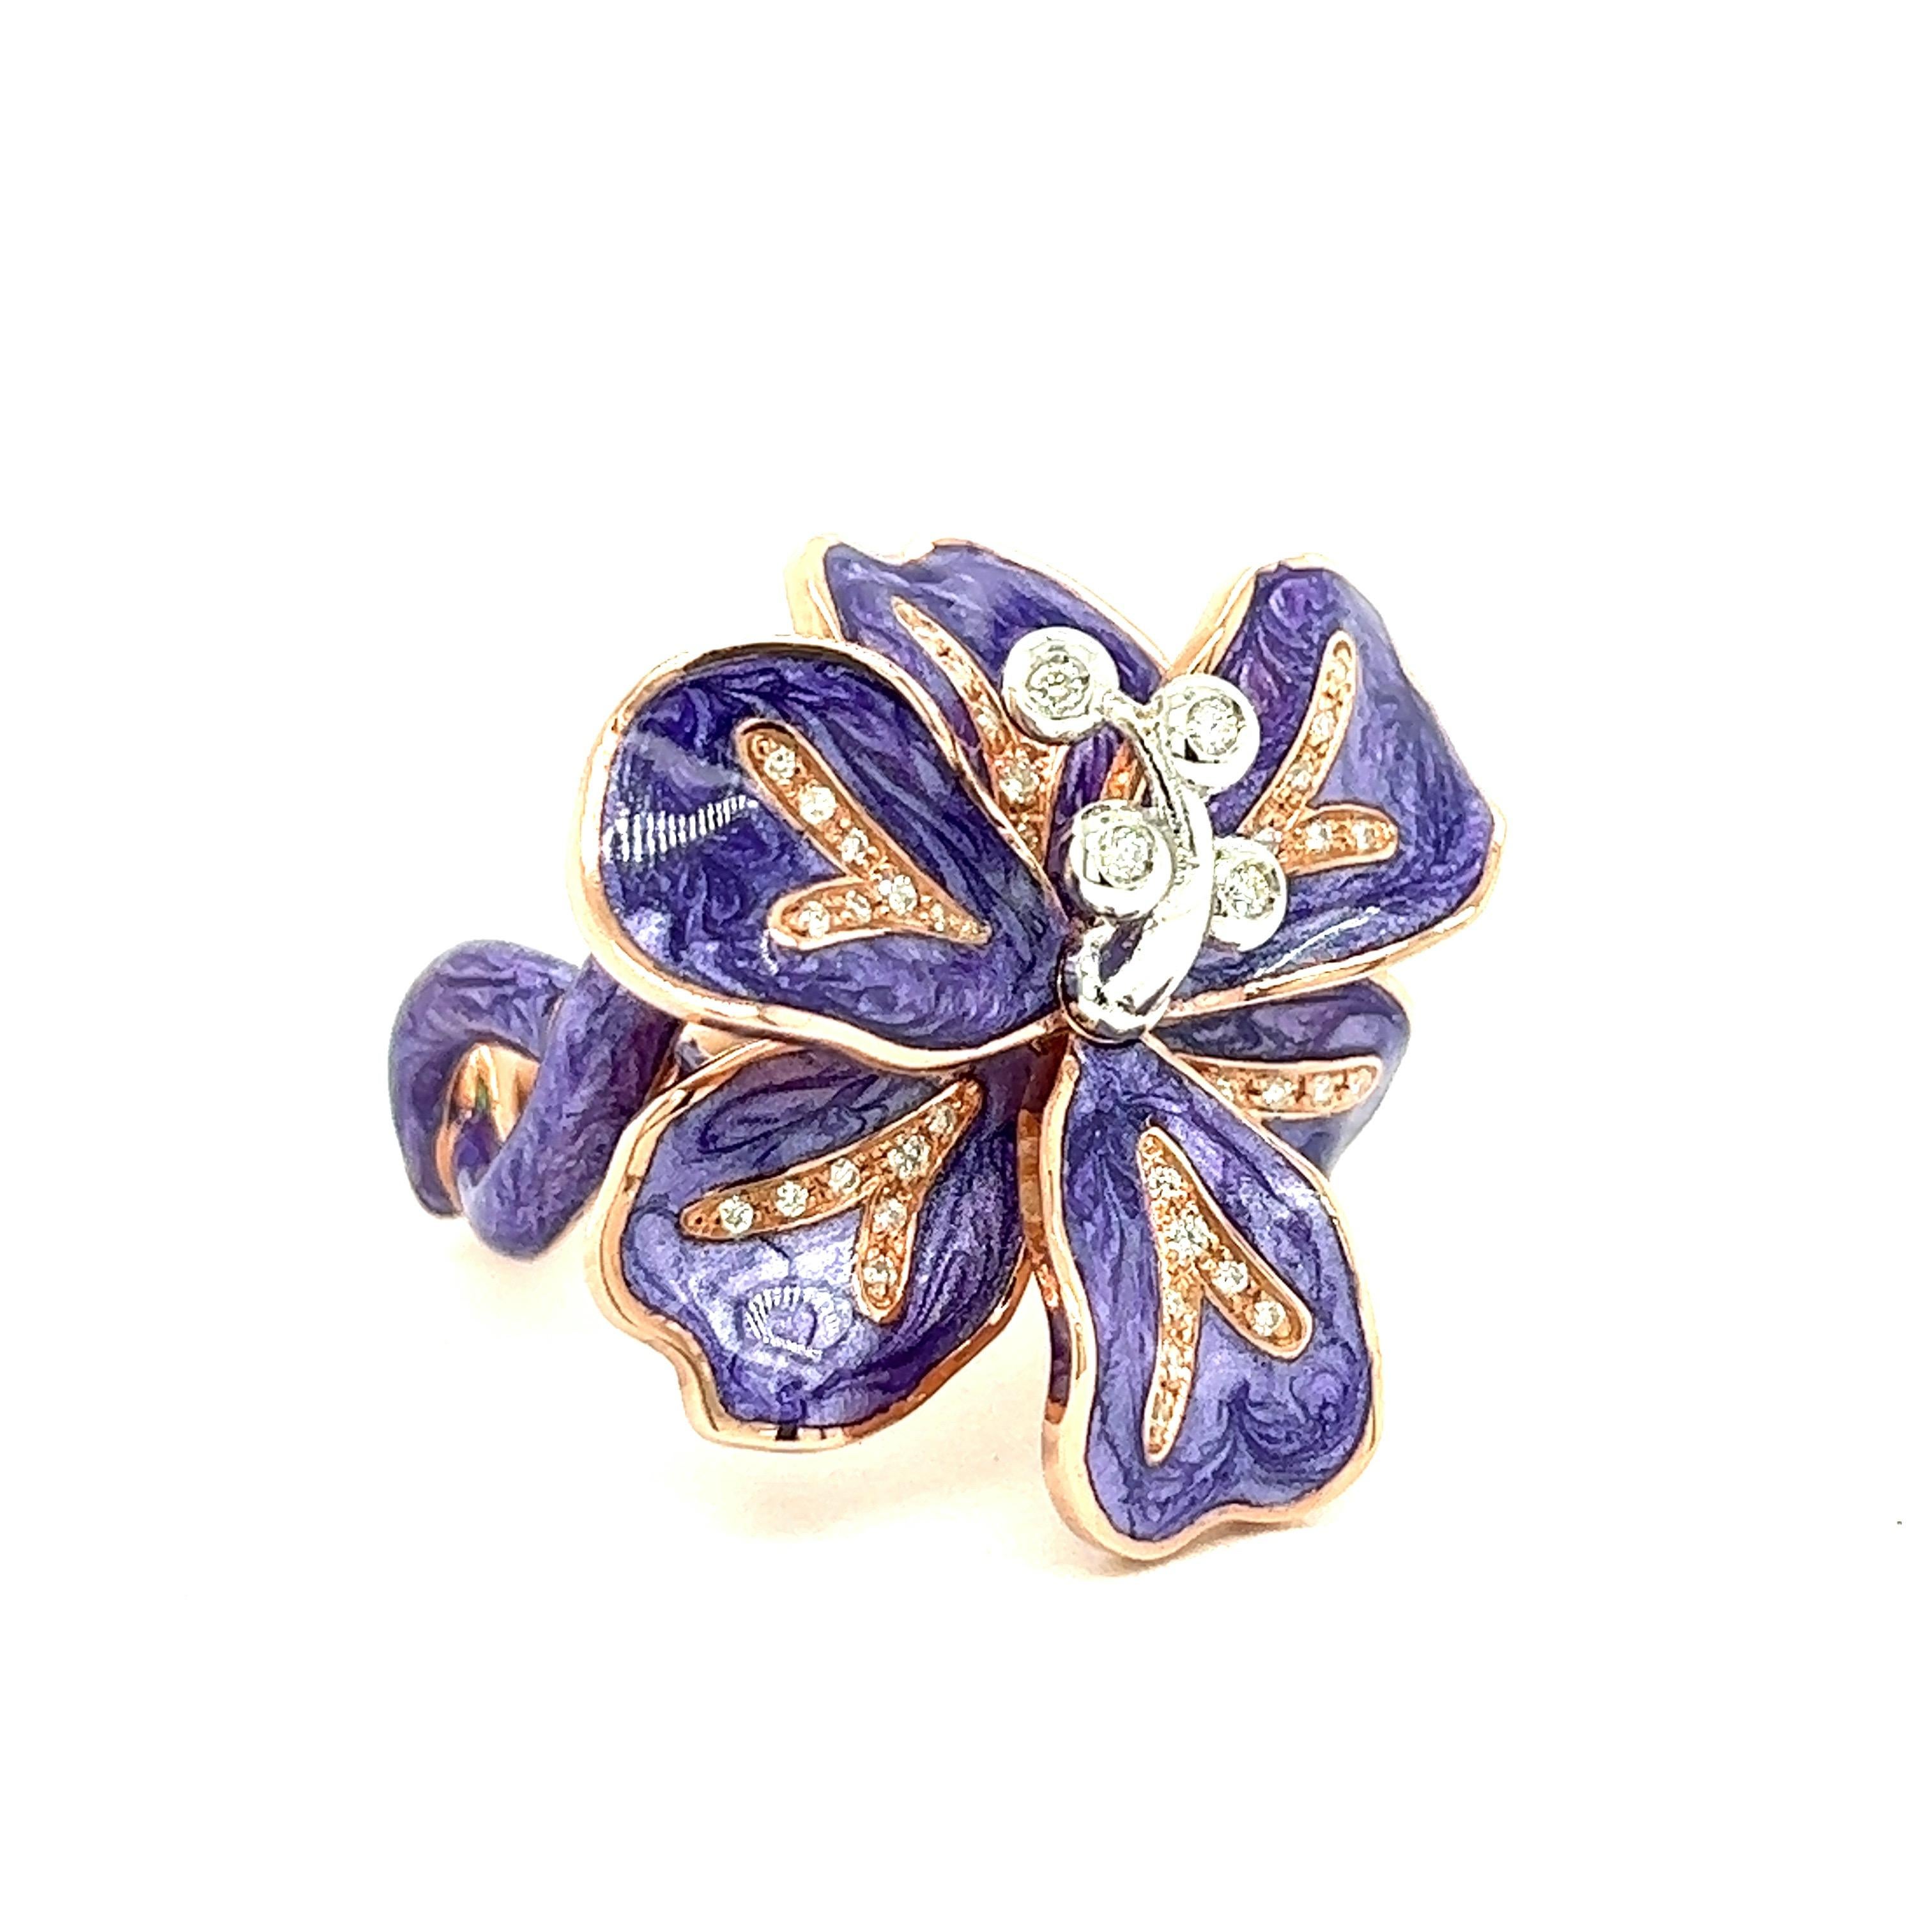 Alexis NY Purple Mother of Pearl Enamel Flower Ring

Small round-cut bezel-set diamonds of 0.52 carat, purple mother of pearl enamel, set on 18 karat rose gold and sterling silver; marked Alexis NY, 750, 925

Size: 7.5 US; top width 3 cm
Total